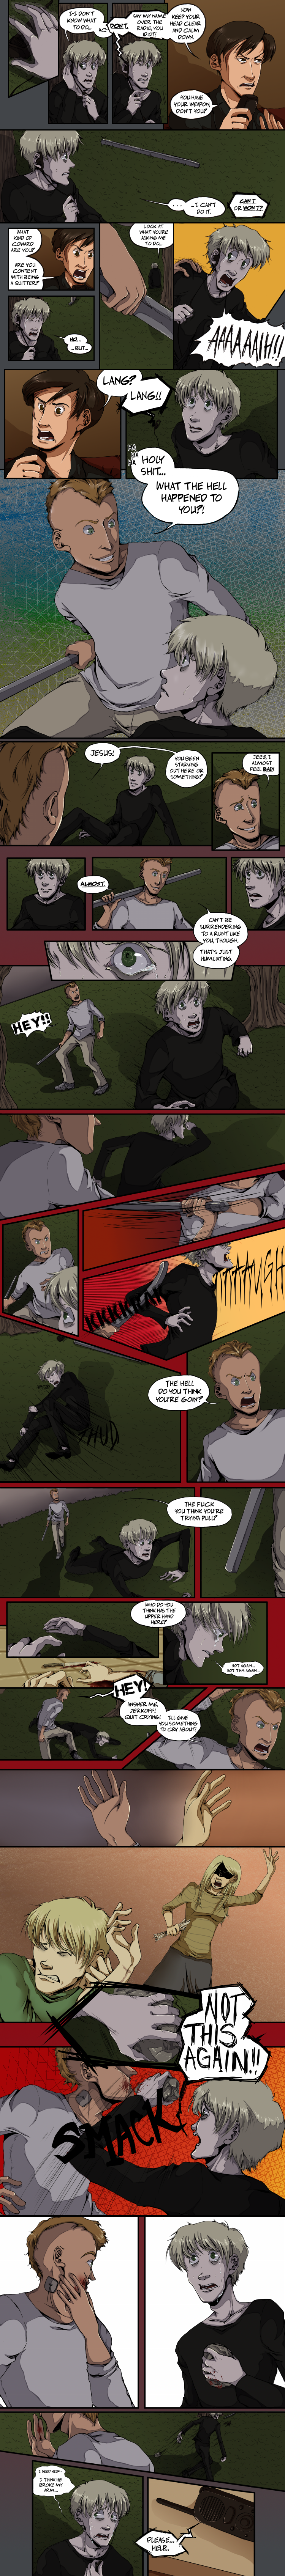 Chapter 04: Page 24-30: First Blood